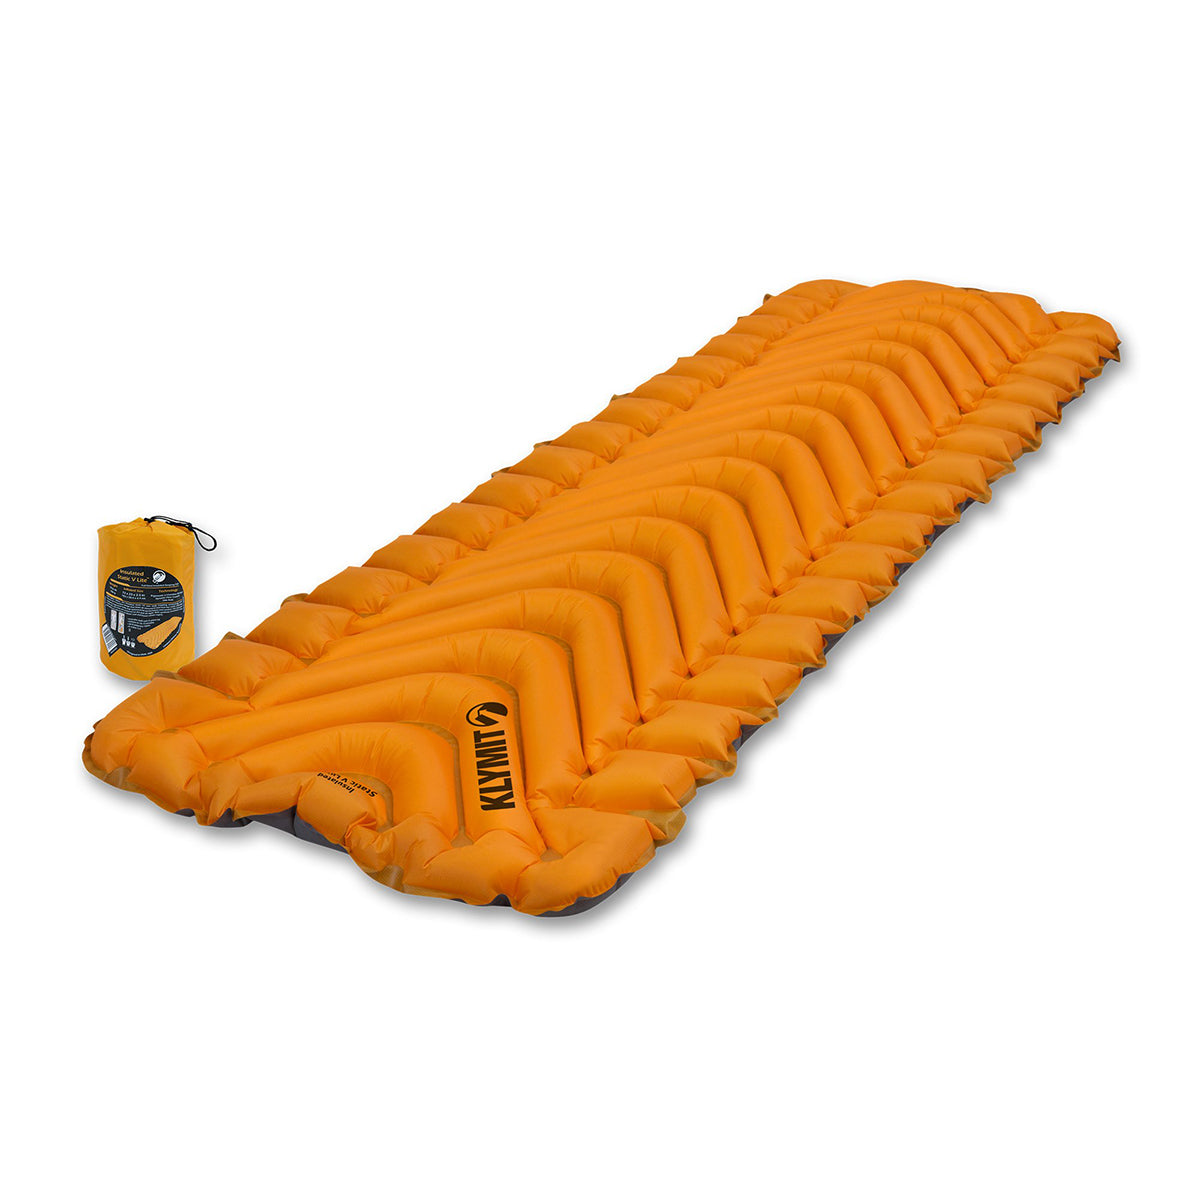 Klymit Insulated Static V Lite Sleeping Pad in Klymit Insulated Static V Lite Sleeping Pad by Klymit | Camping - goHUNT Shop by GOHUNT | Klymit - GOHUNT Shop